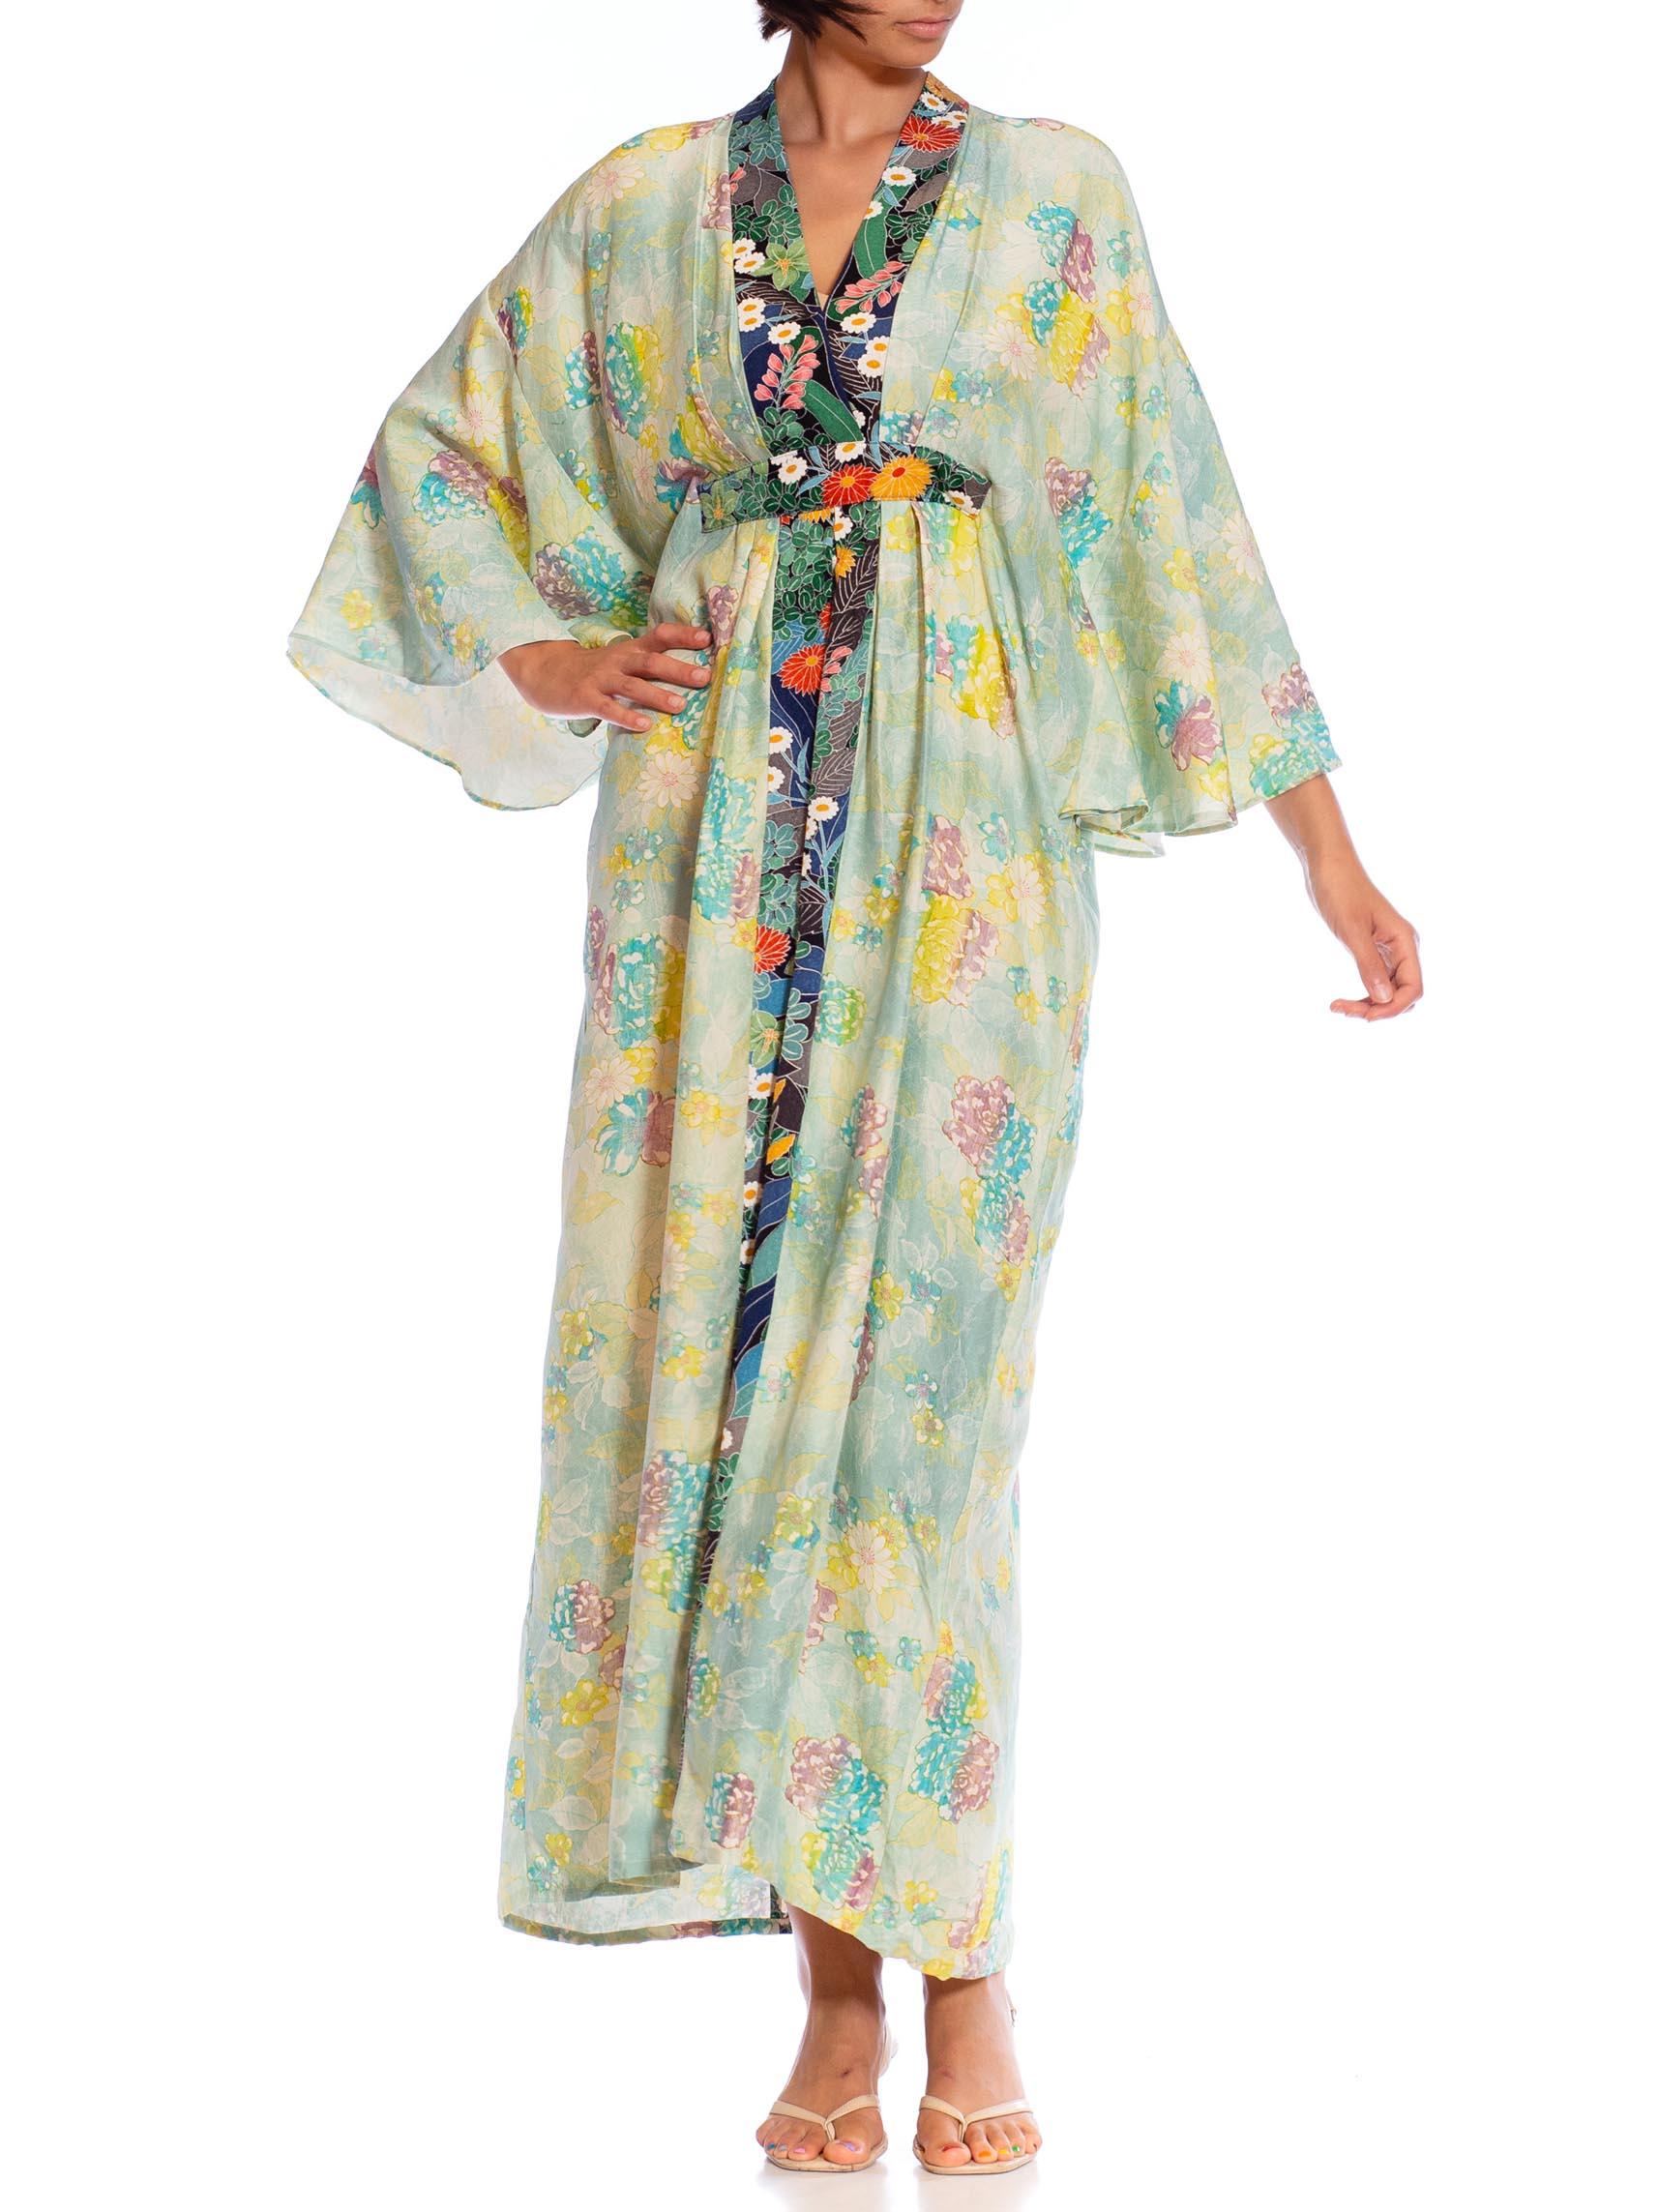 MORPHEW COLLECTION Teal Japanese Kimono Silk Floral Pattern Kaftan Dark Blue An In New Condition For Sale In New York, NY